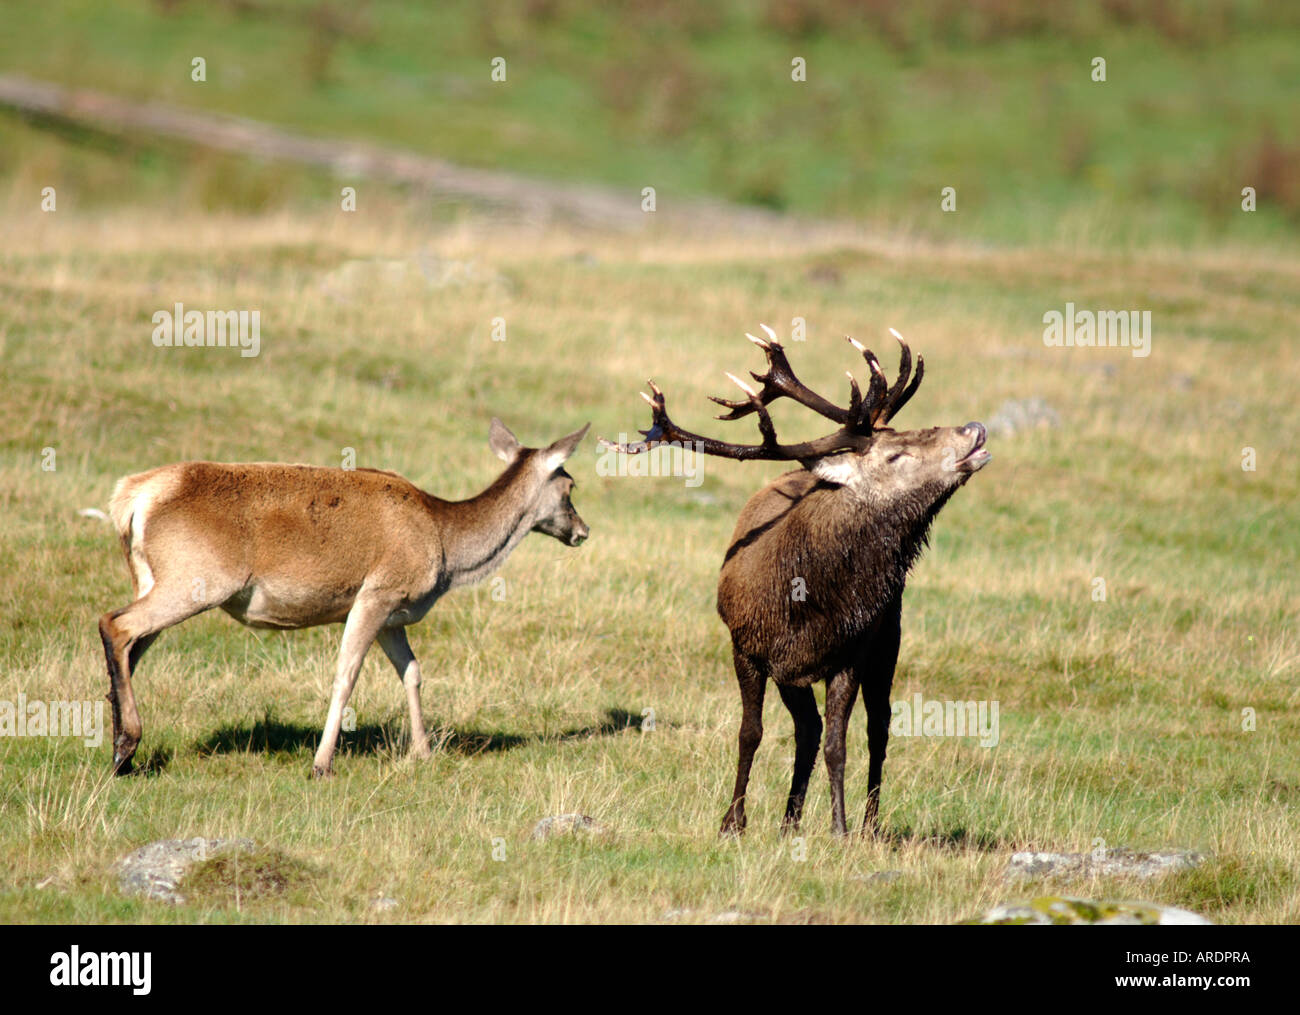 Red Deer Stag holding femmine e impegnativo si troverebbe a competere maschi. 3723-357 XMM Foto Stock